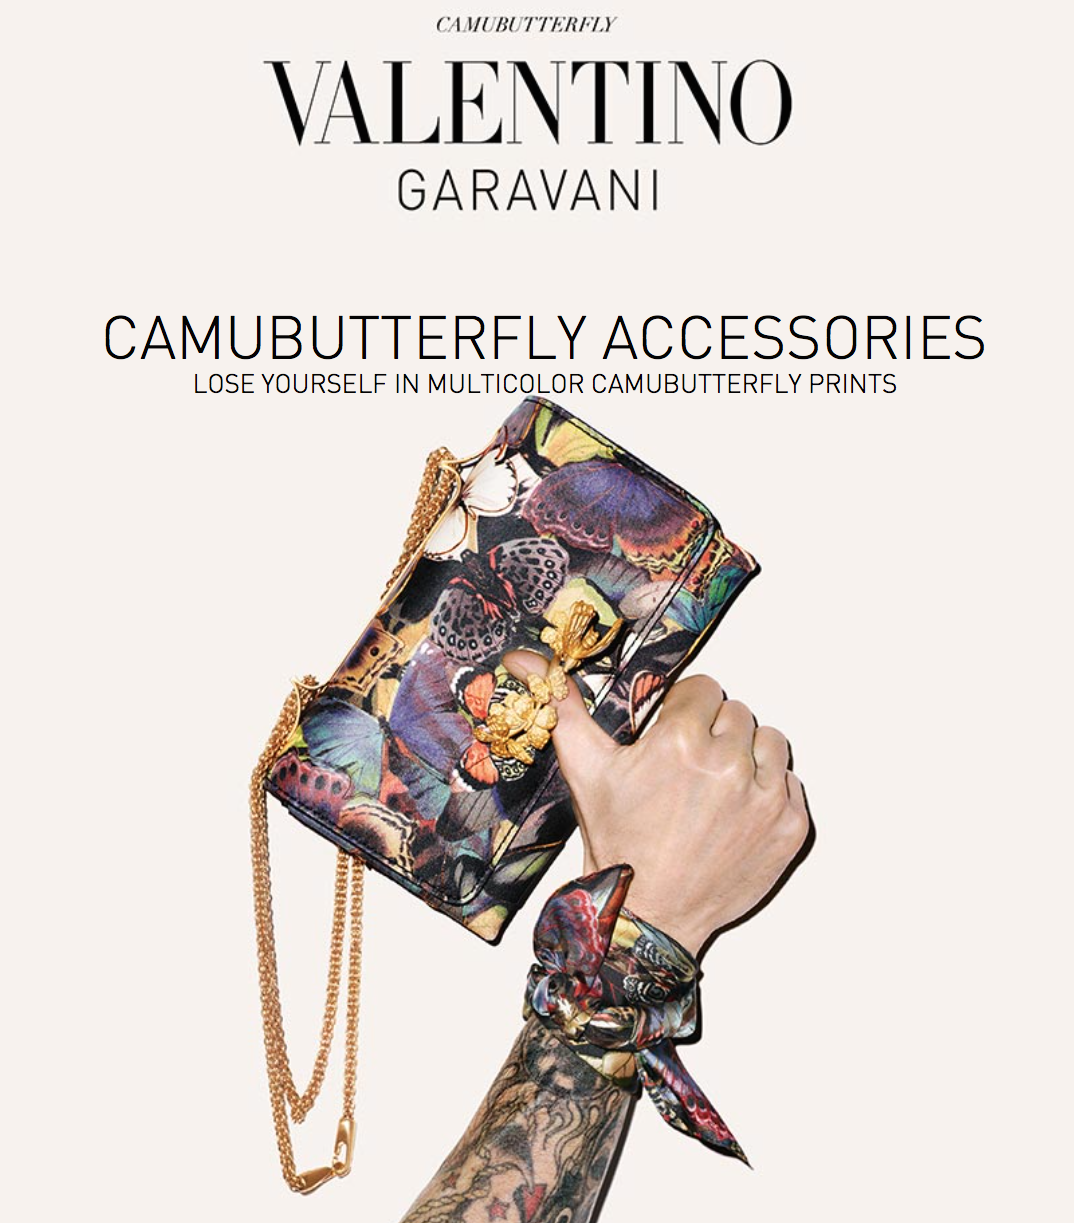 Valentino's CamuButterfly